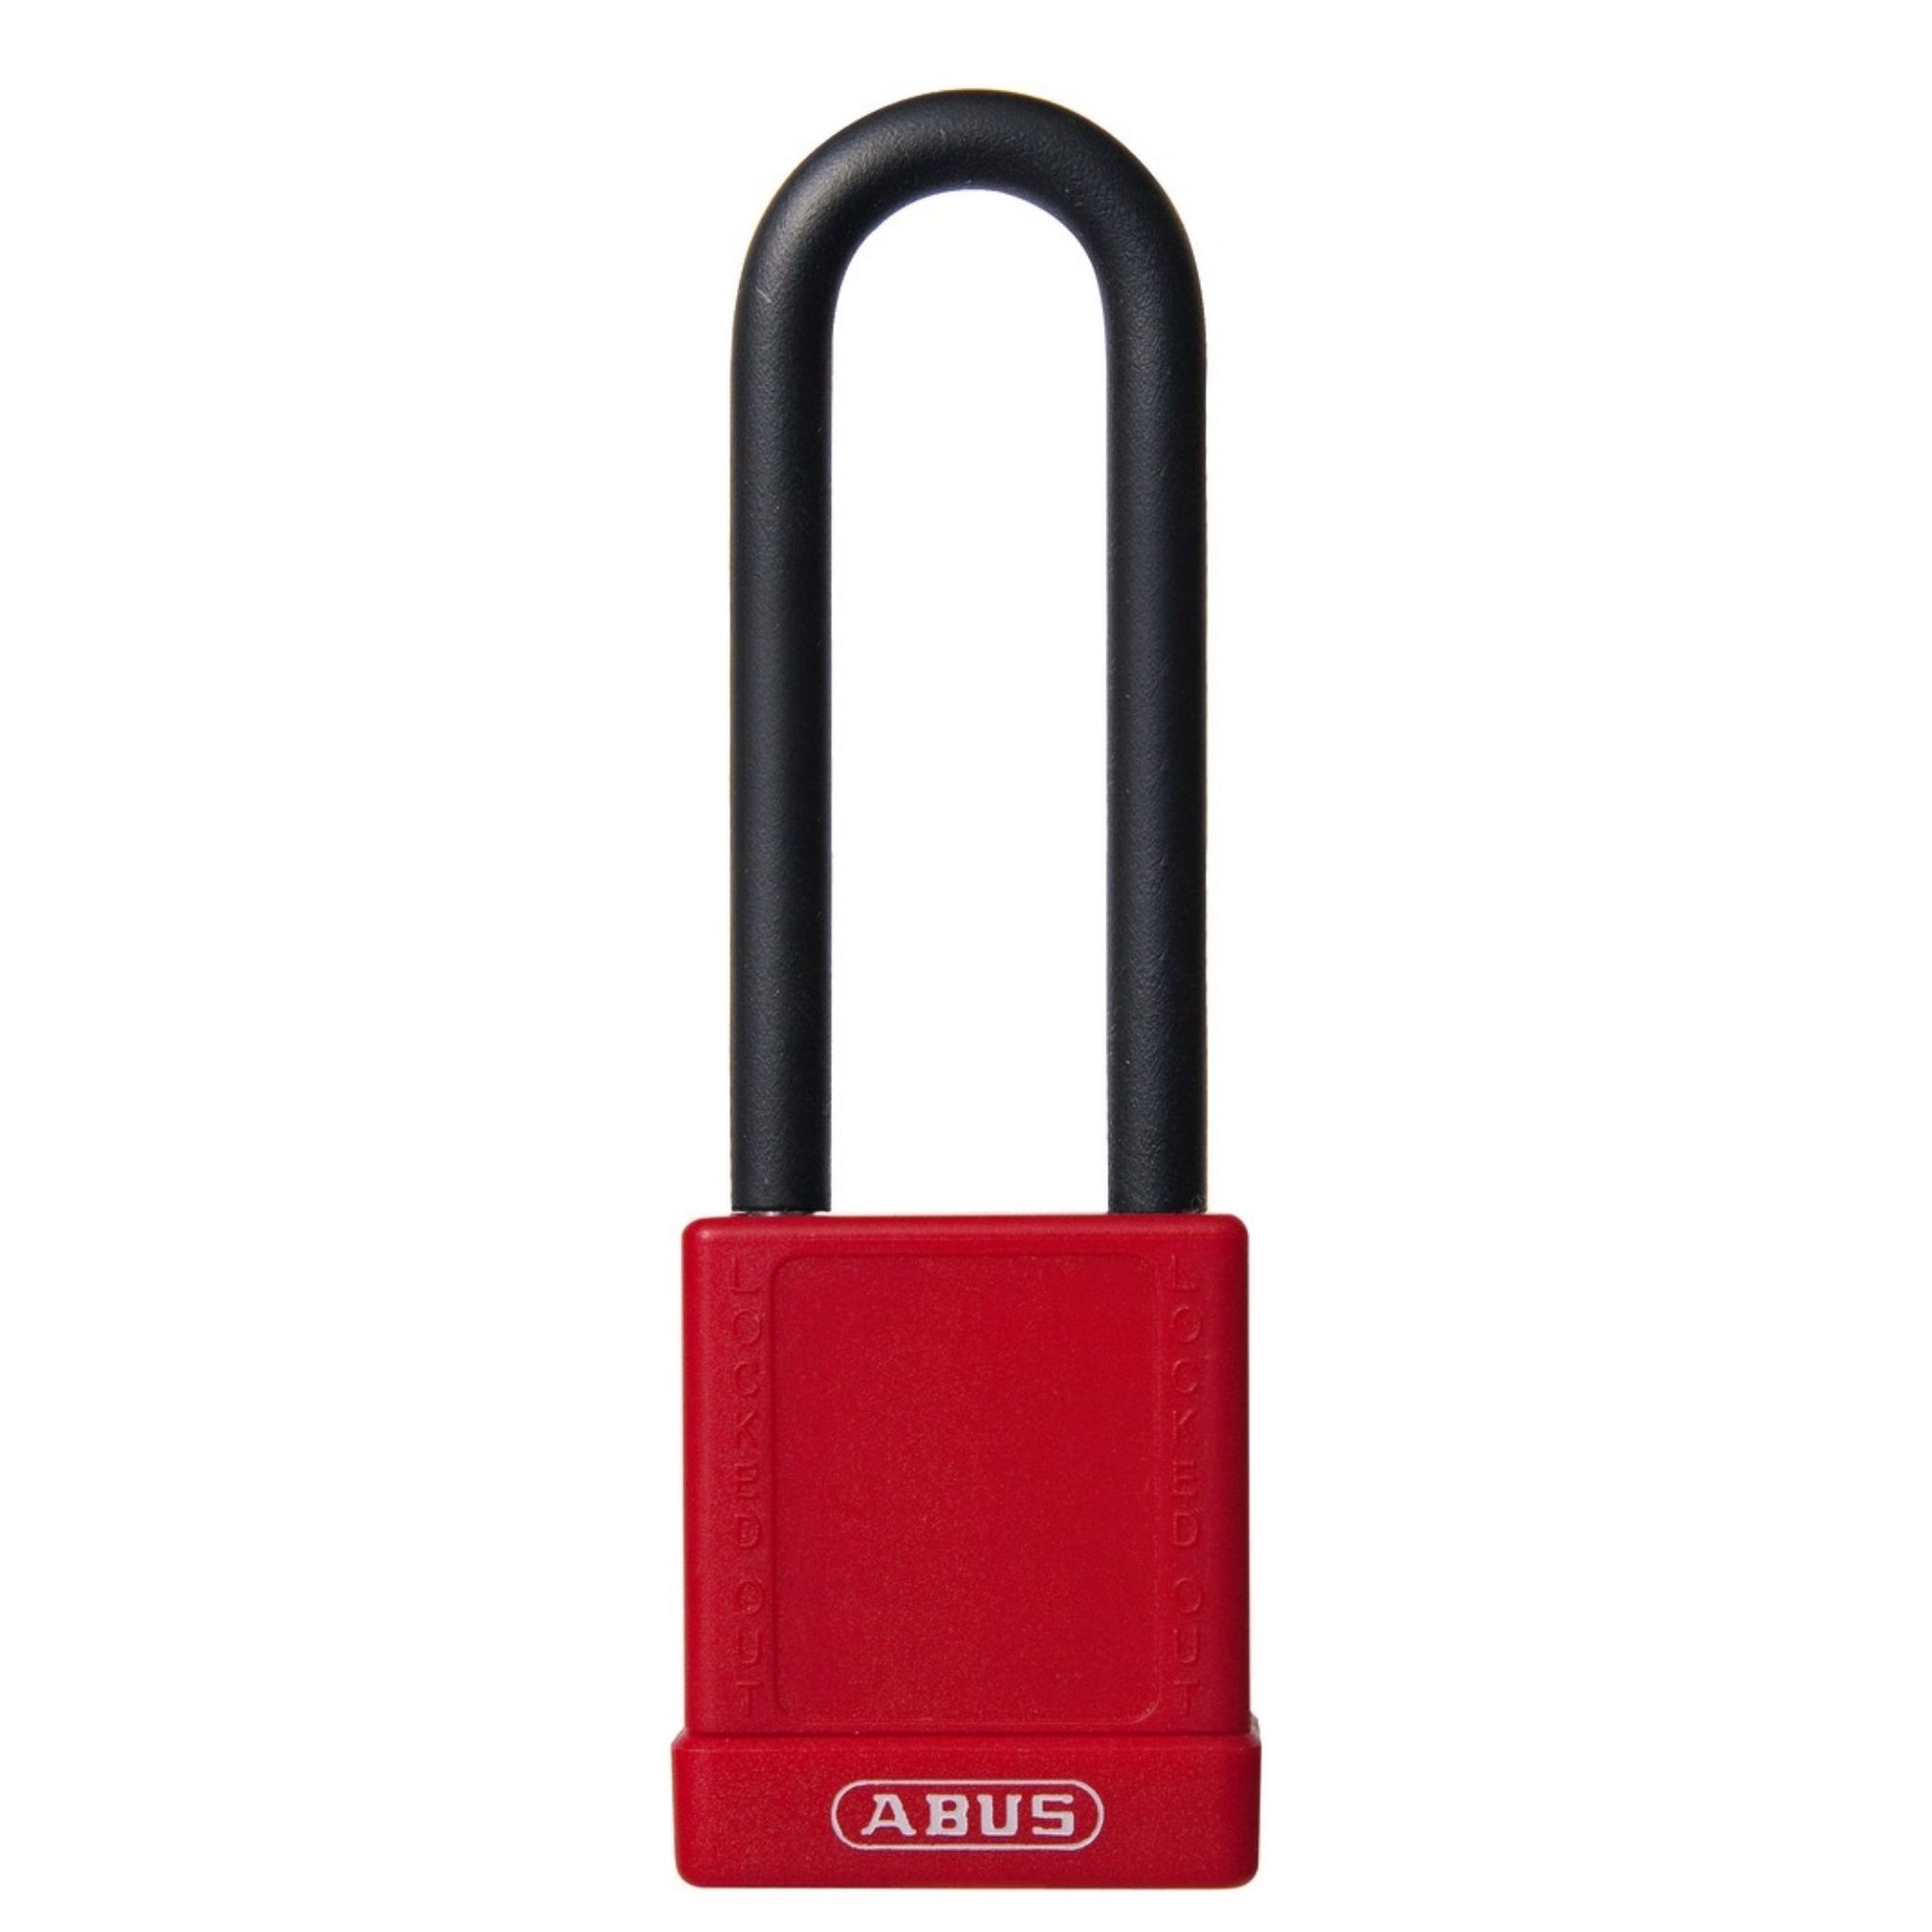 Abus 74/40HB75 Insulated Red Safety Lock with 3-Inch Shackle, Color-Coded Lockout Tagout Padlocks - The Lock Source